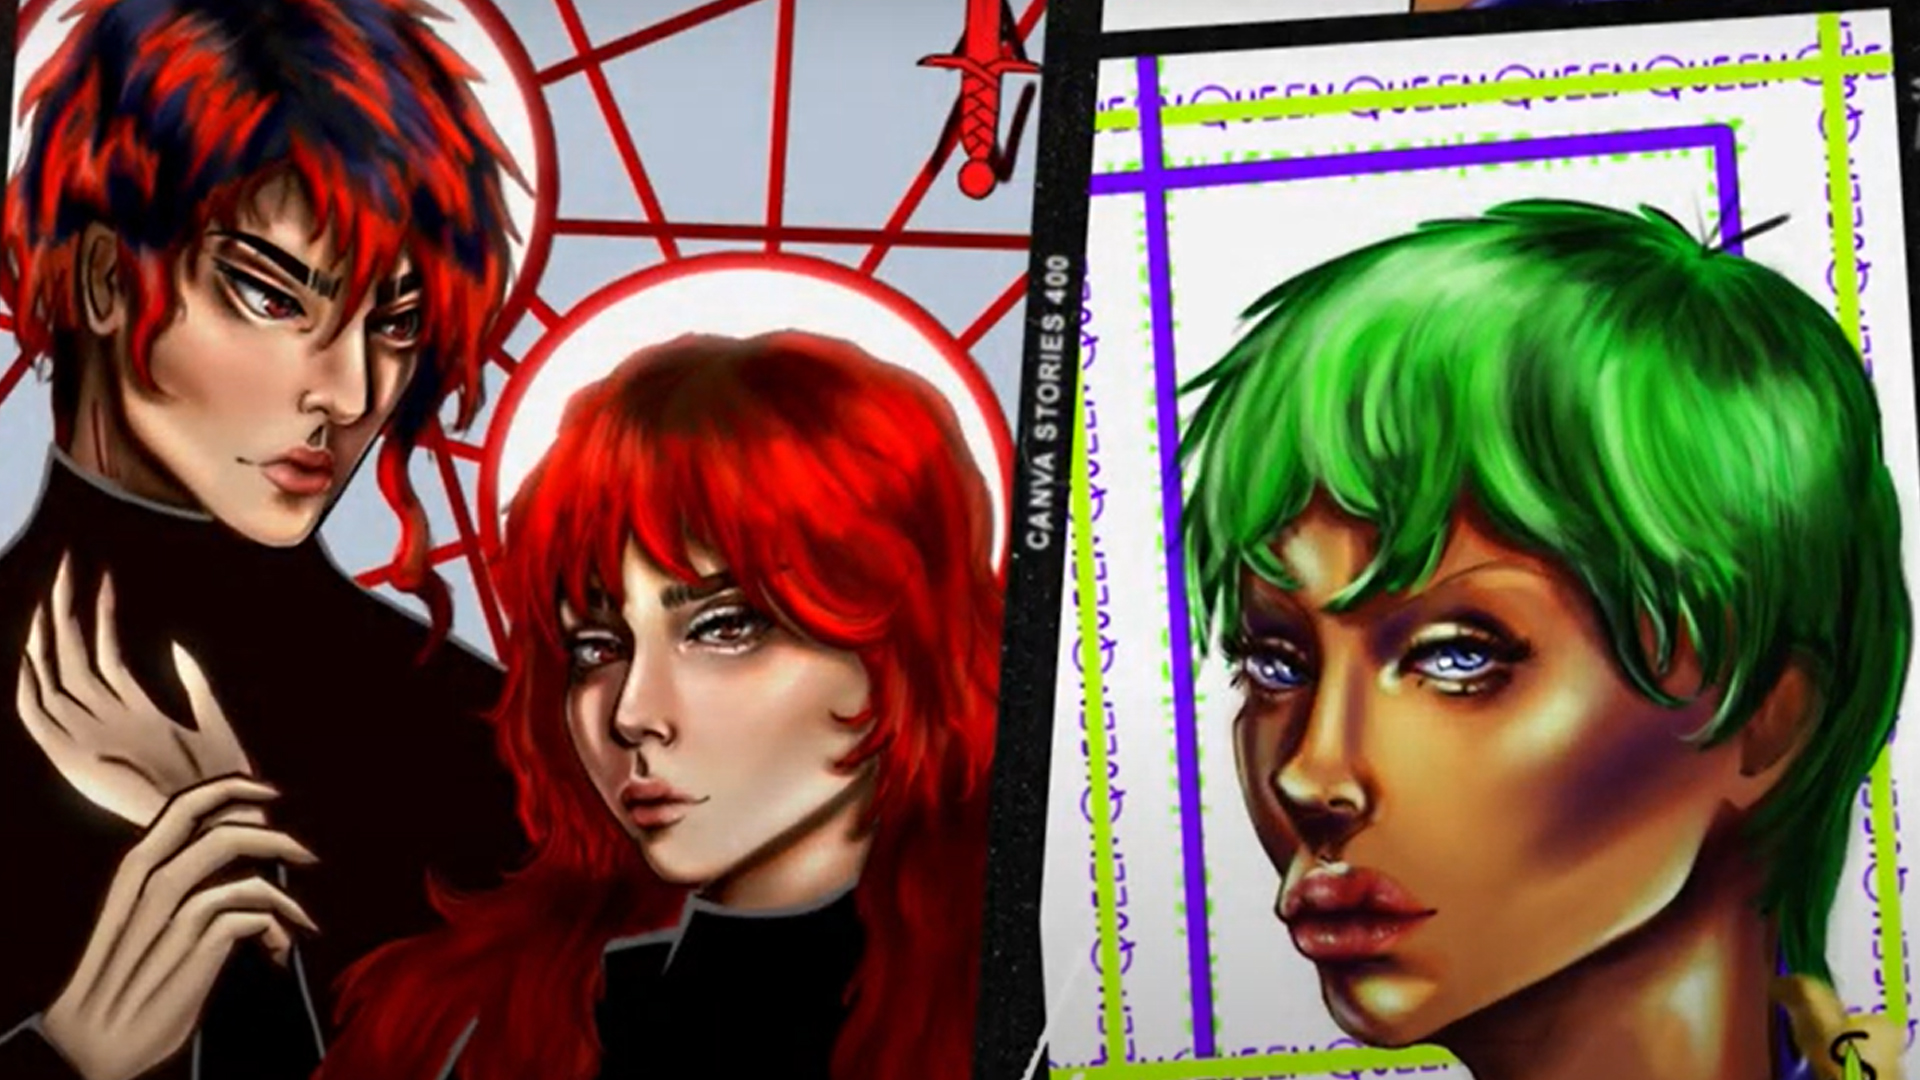 image of people with red and green hair - artwork from show